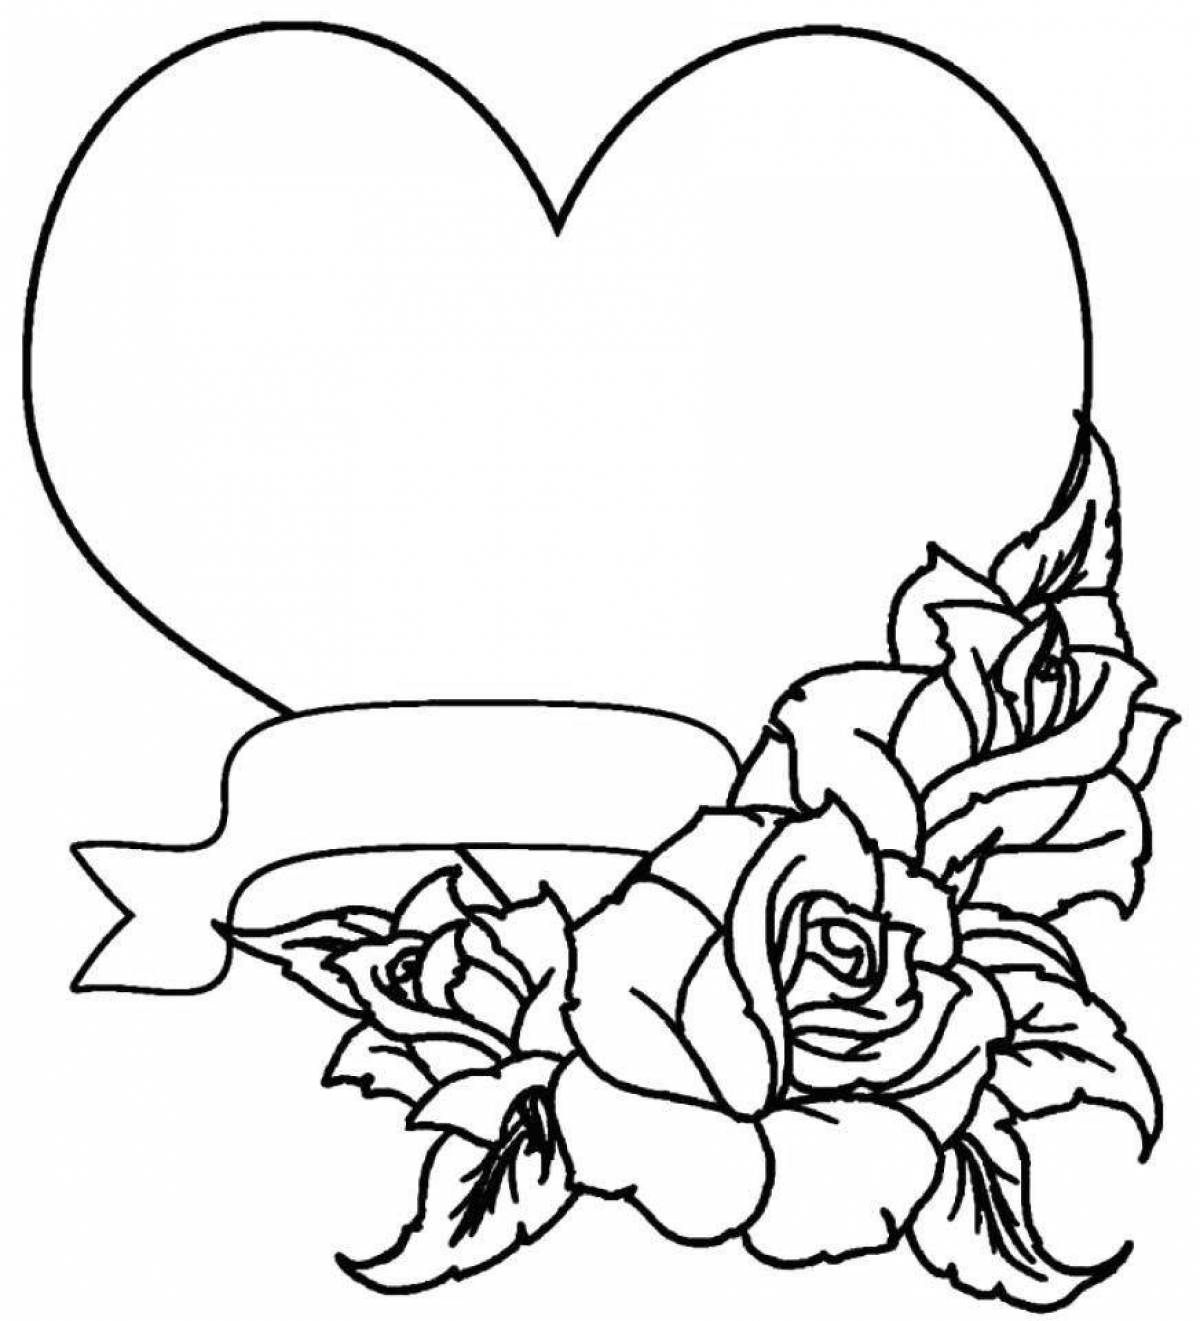 Jolly heart and flower coloring